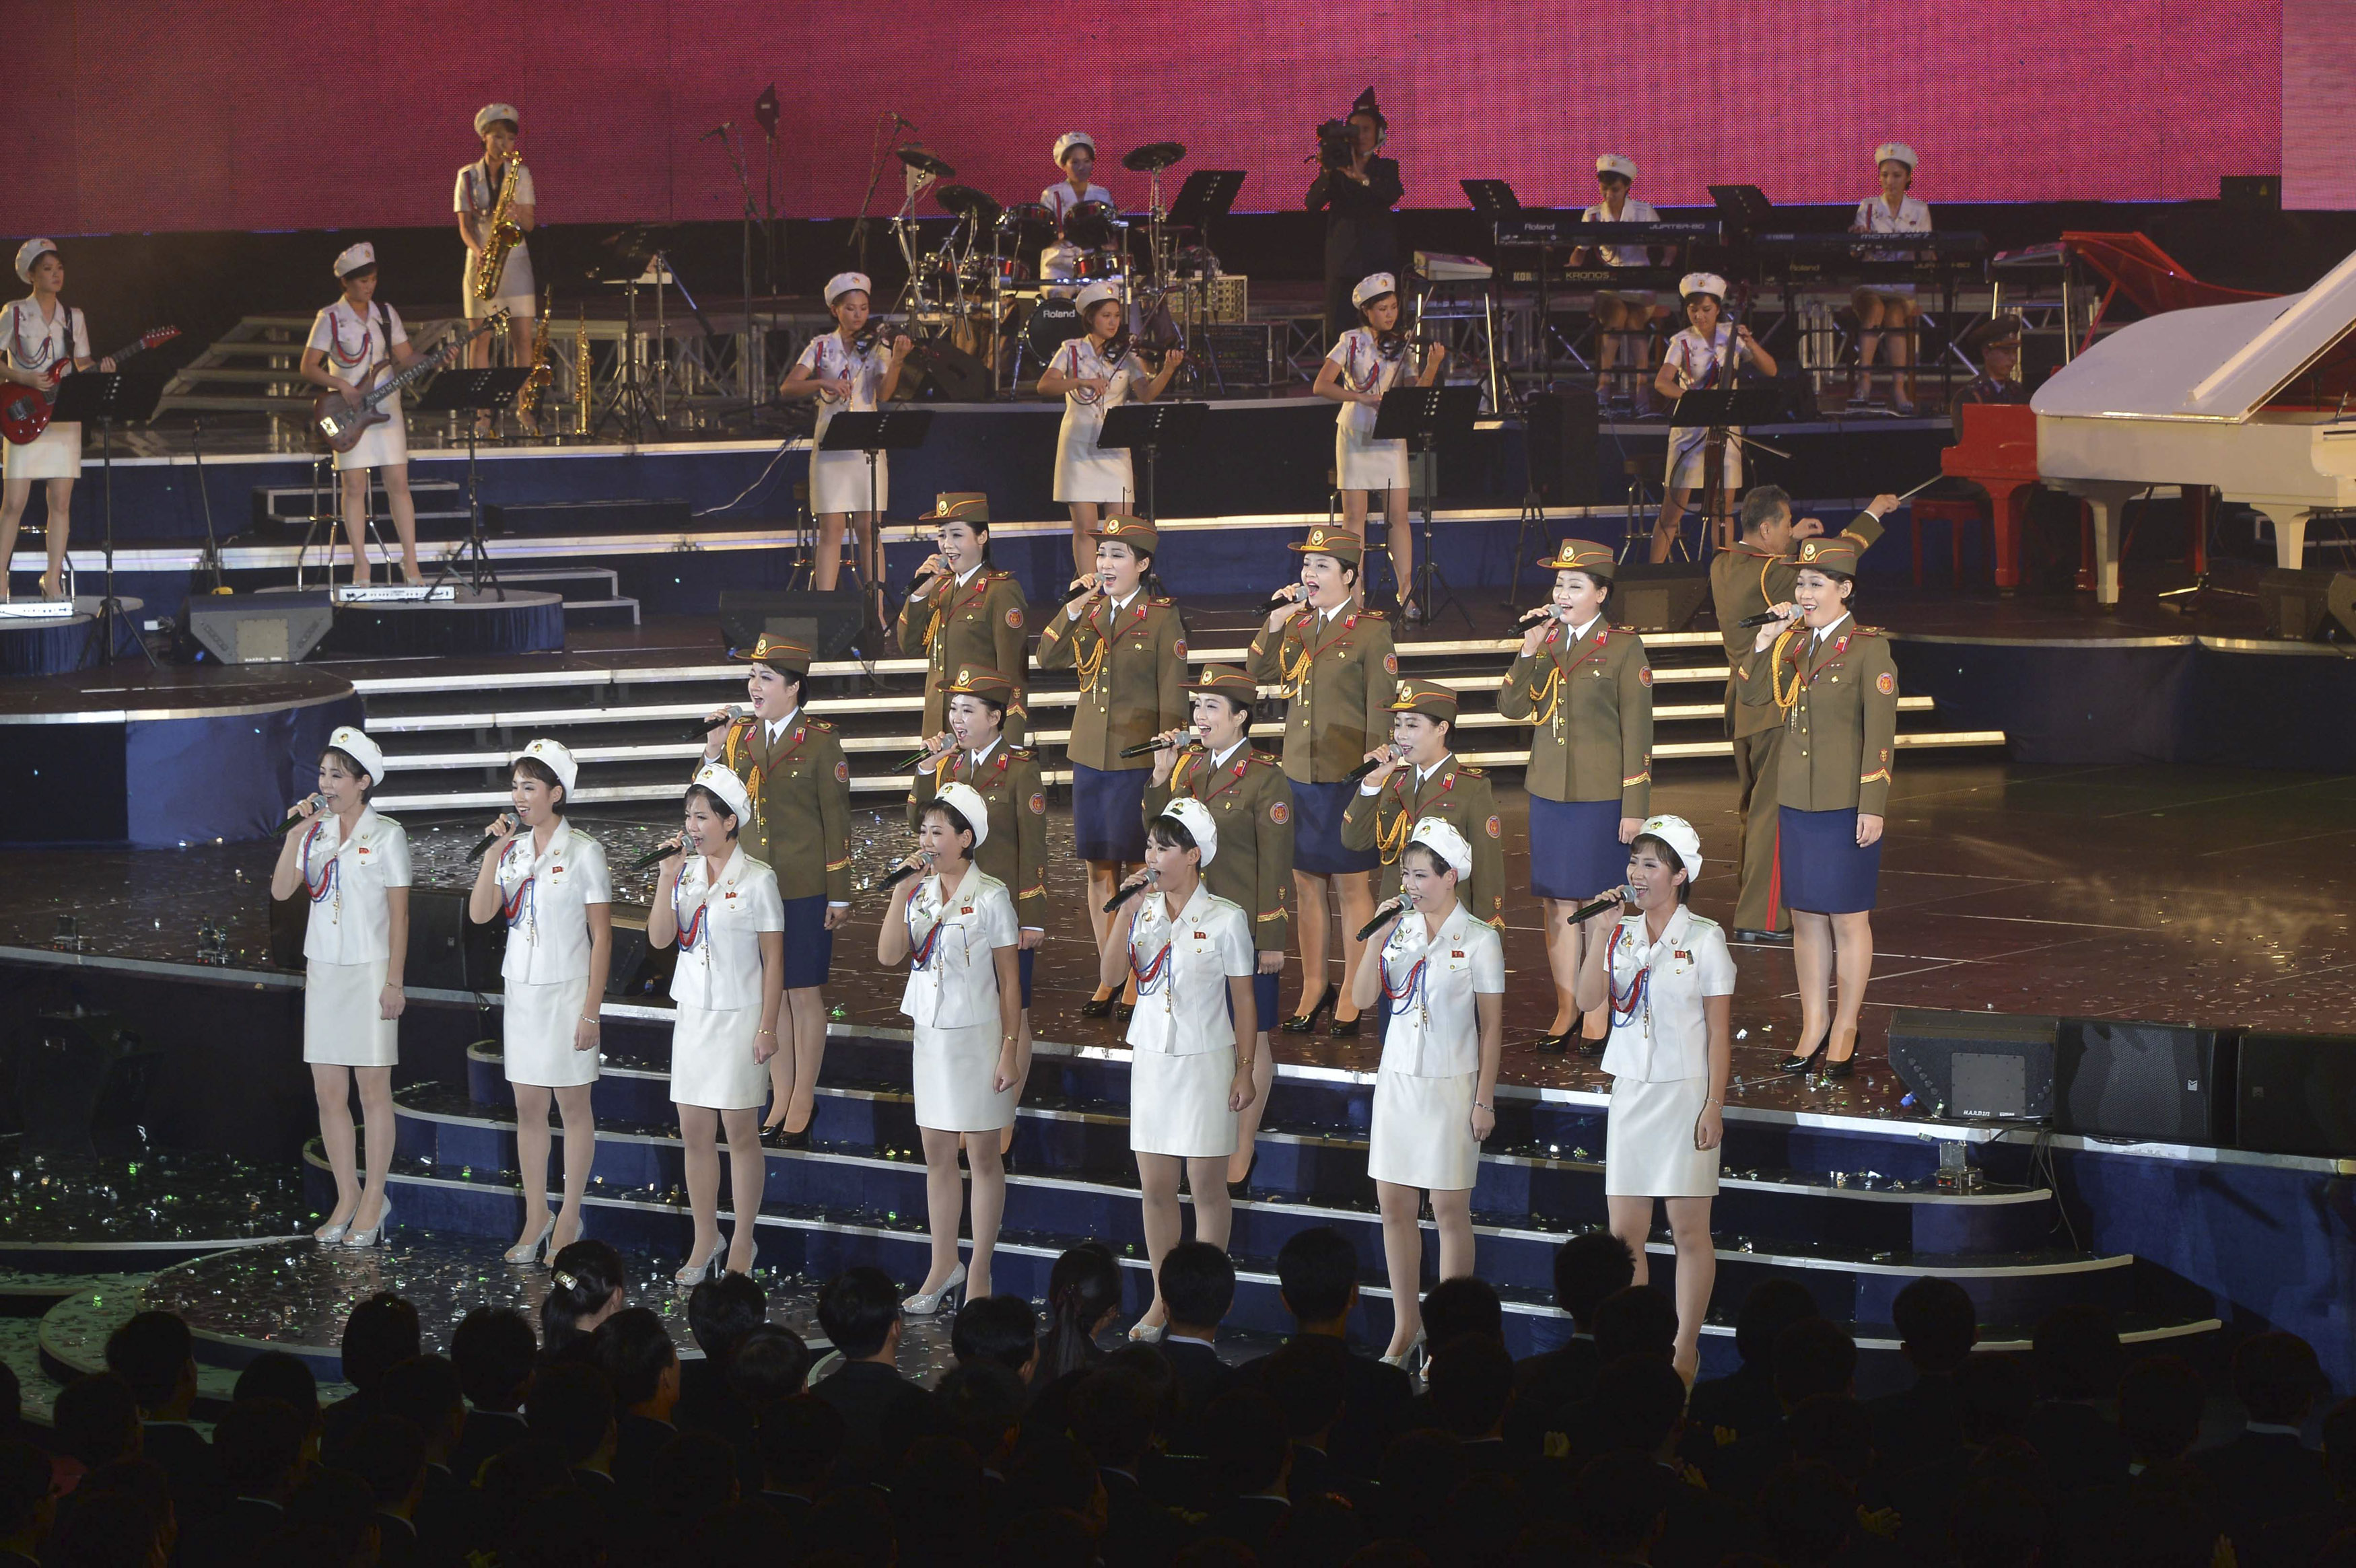 Members of the Moranbong Band and the State Merited Chorus take part in a joint performance to celebrate the 68th anniversary of the Workers' Party of Korea (WPK) in this undated photo released by North Korea's Korean Central News Agency (KCNA) in Pyongyang, Oct. 11, 2013. (KCNA/Reuters)